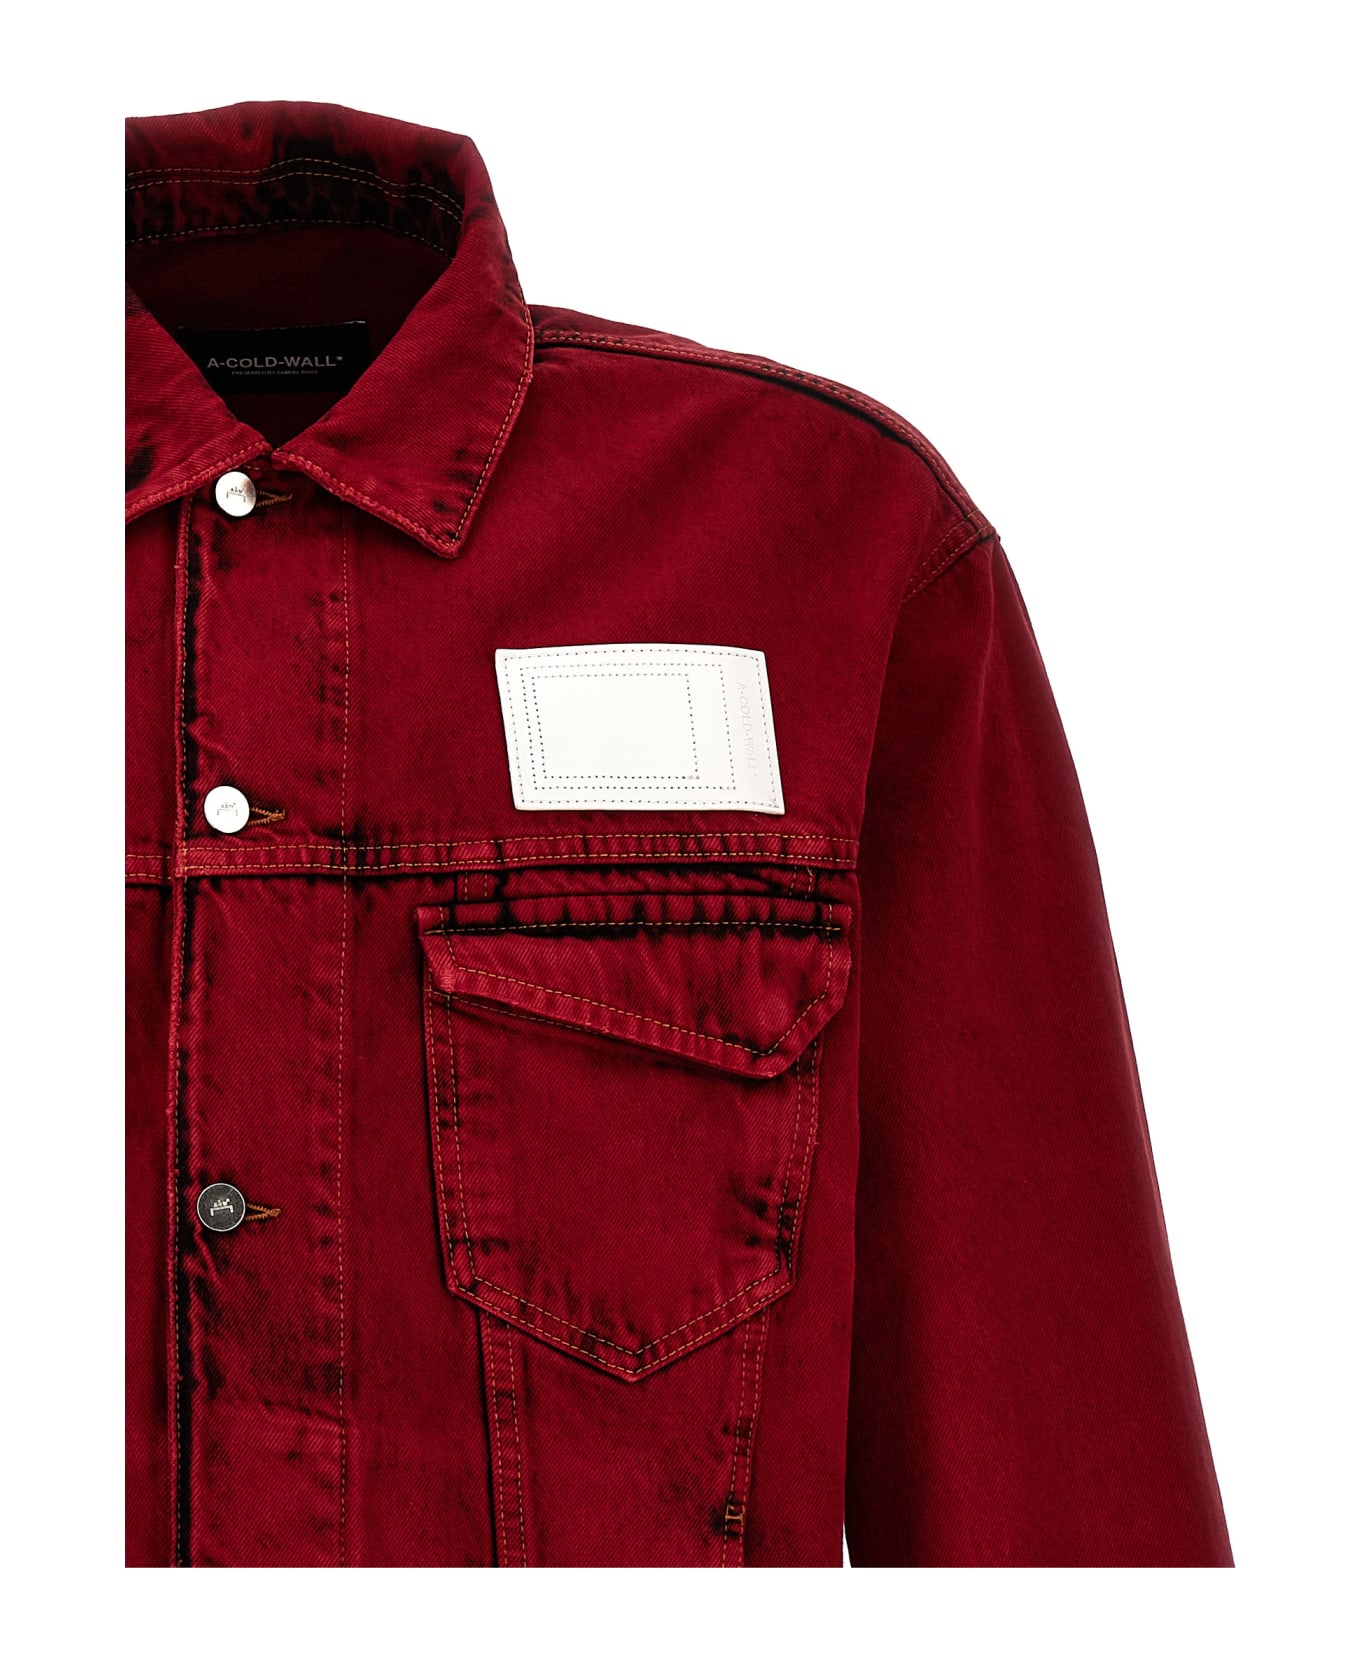 A-COLD-WALL 'strand Trucker' Jacket - Red